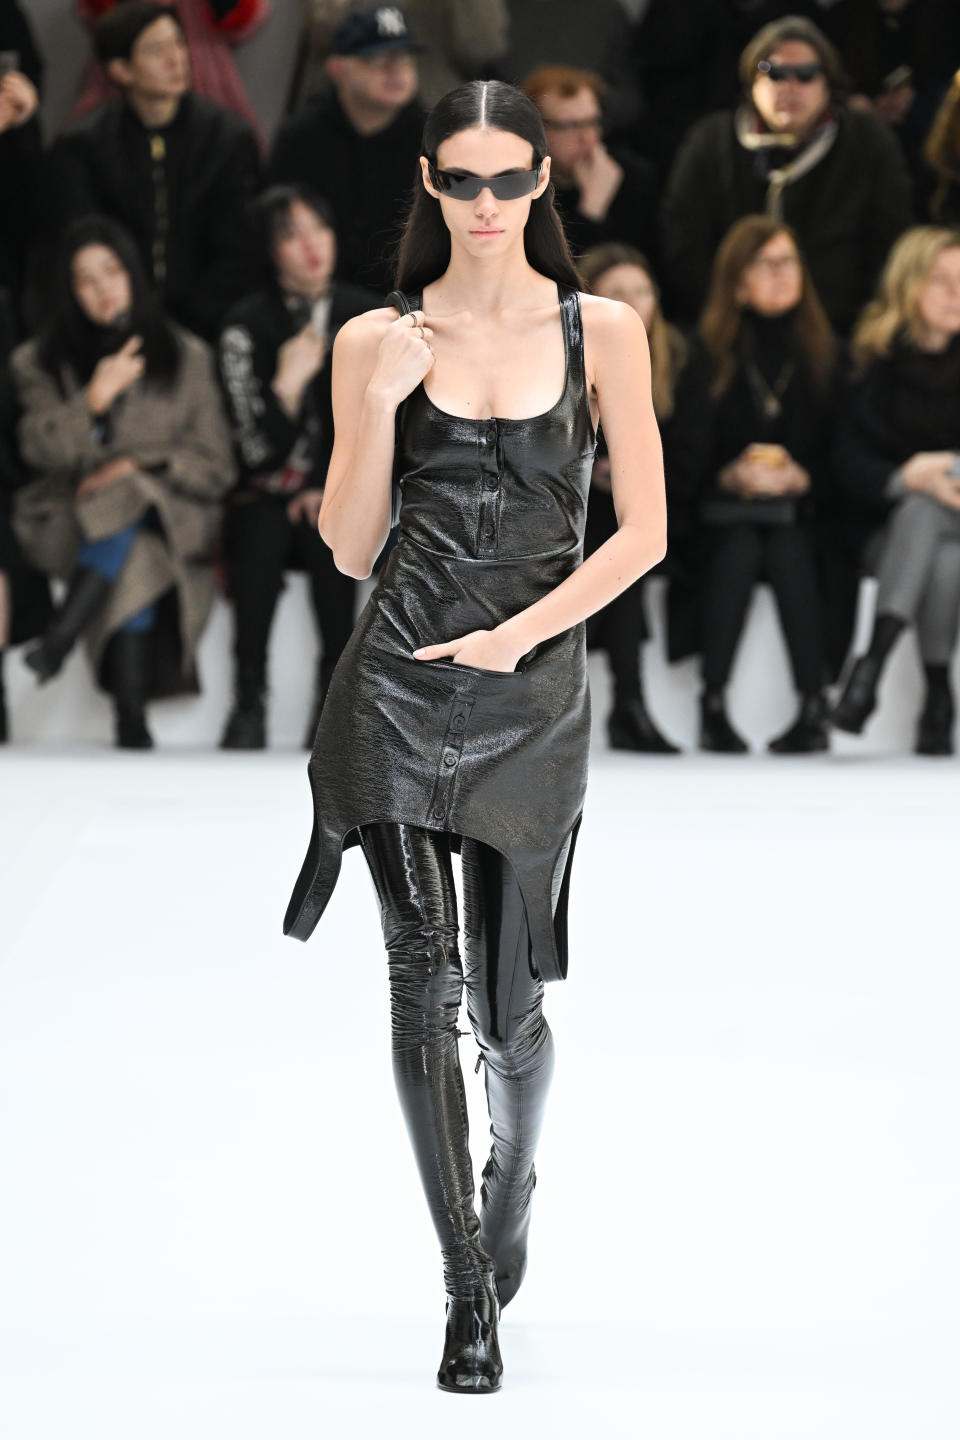 PARIS, FRANCE - FEBRUARY 28: (EDITORIAL USE ONLY - For Non-Editorial use please seek approval from Fashion House) A model walks the runway during the Courrèges Womenswear Fall/Winter 2024-2025 show as part of Paris Fashion Week on February 28, 2024 in Paris, France. (Photo by Yanshan Zhang/Getty Images)